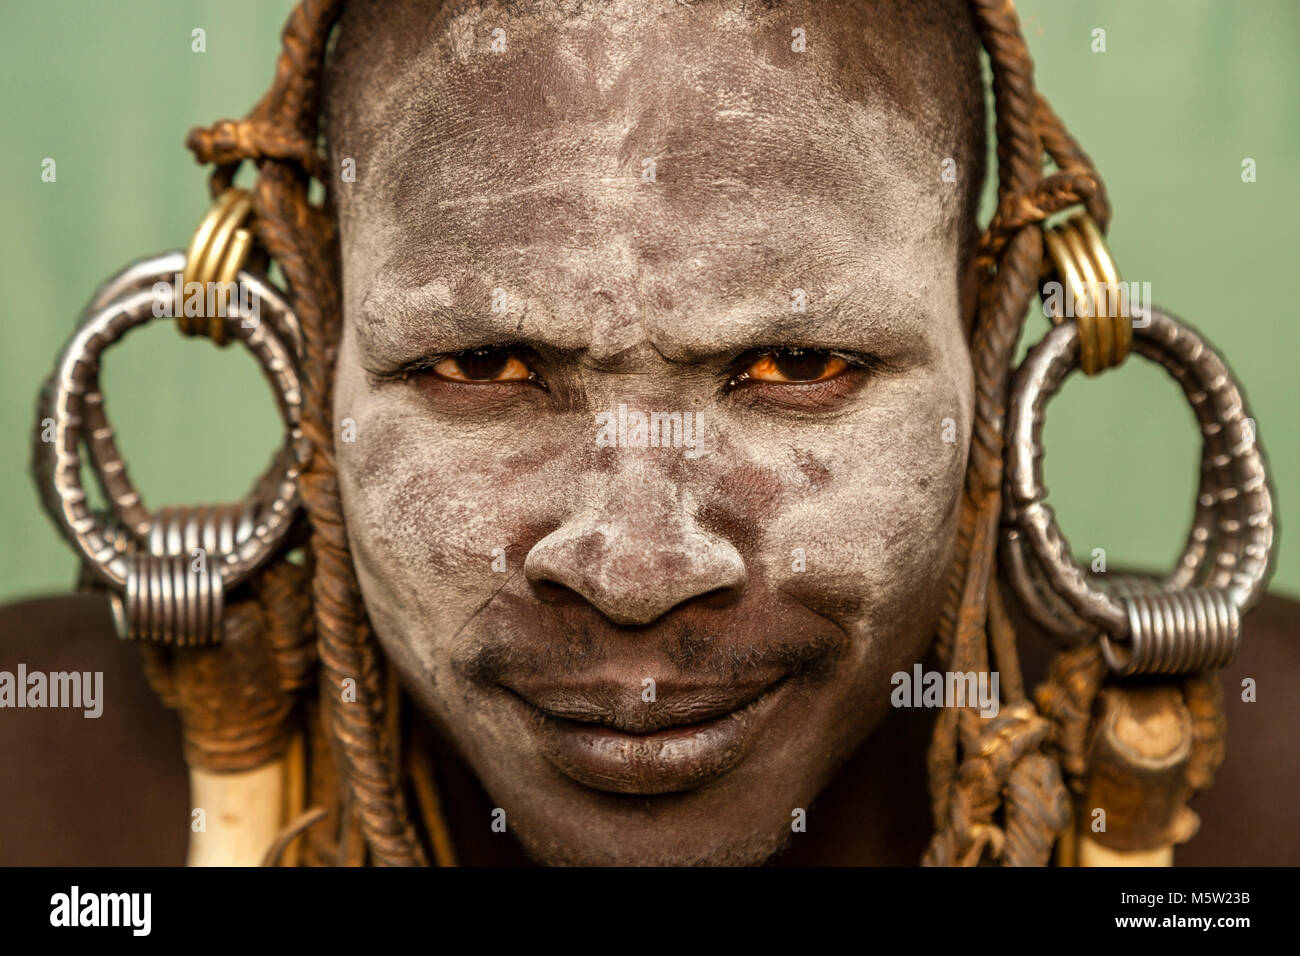 A Portrait Of A Young Man From The Mursi Tribe, Mursi Village, Omo Valley, Ethiopia Stock Photo